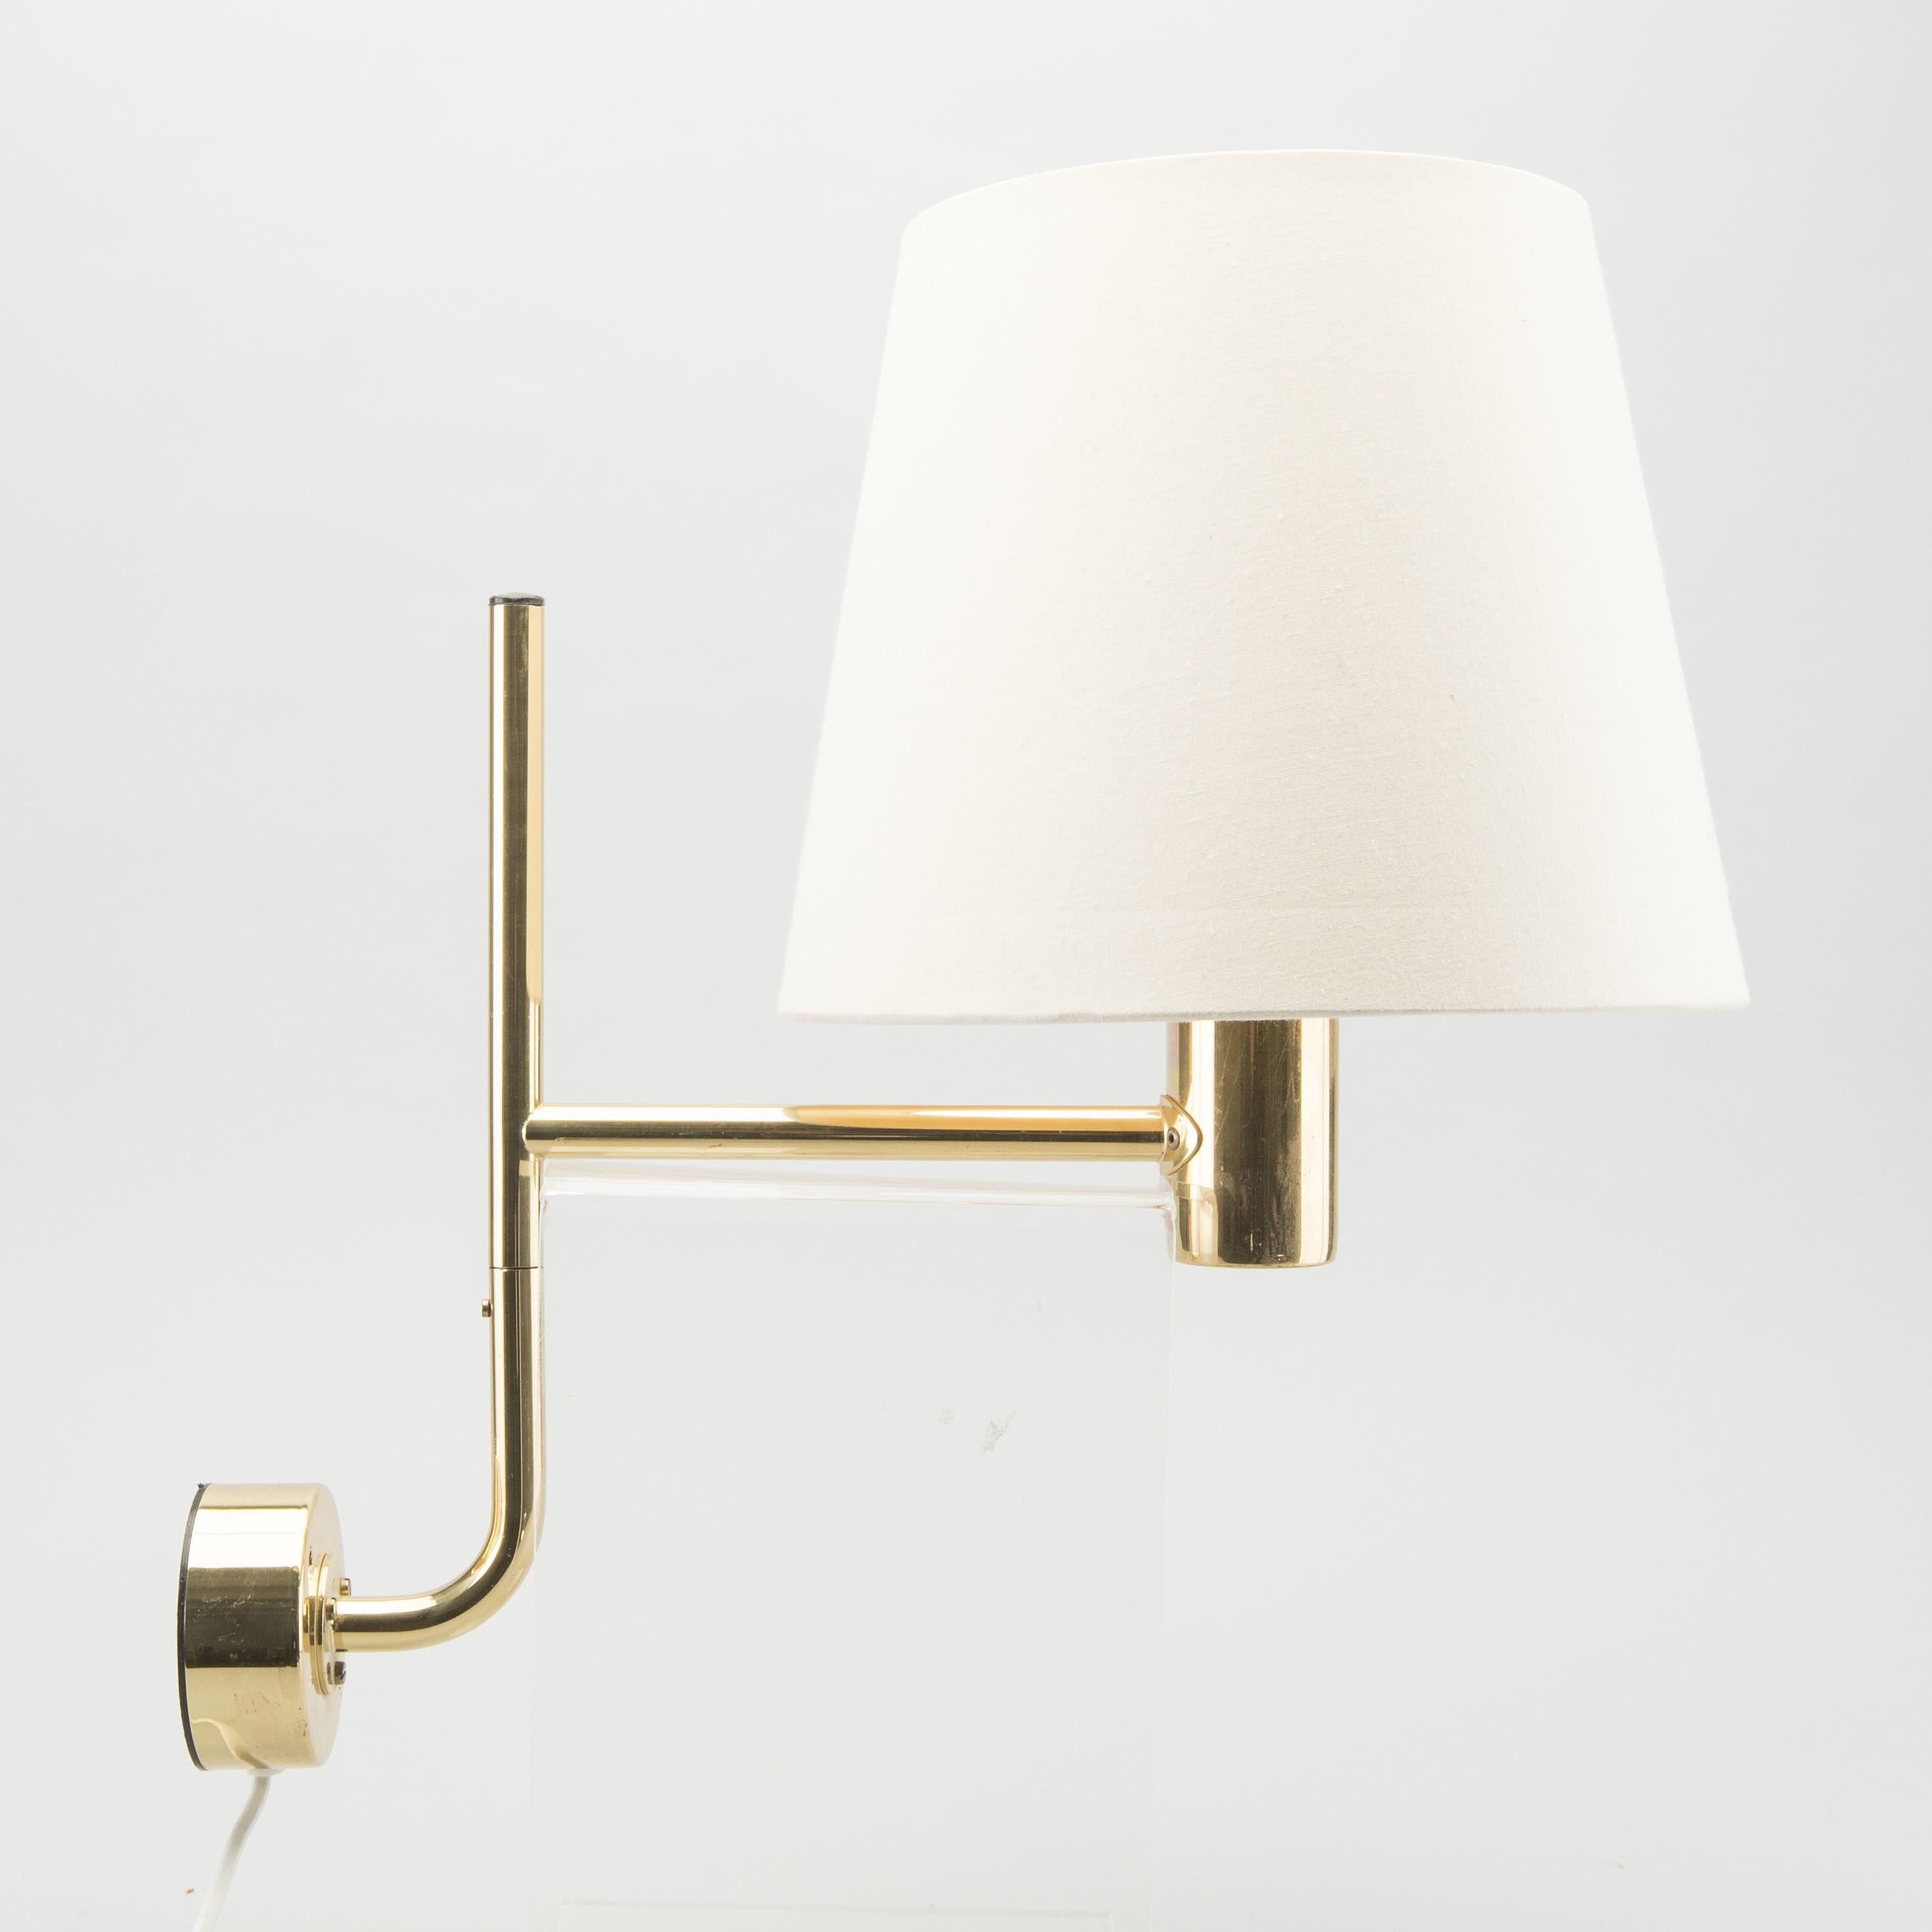 A pair of wall lights by Hans-Agne Jakobsson, brass with cream shades. Shades and brass show wear consistent with age. Labels at bottom of fixtures.
Can be rewired upon request.